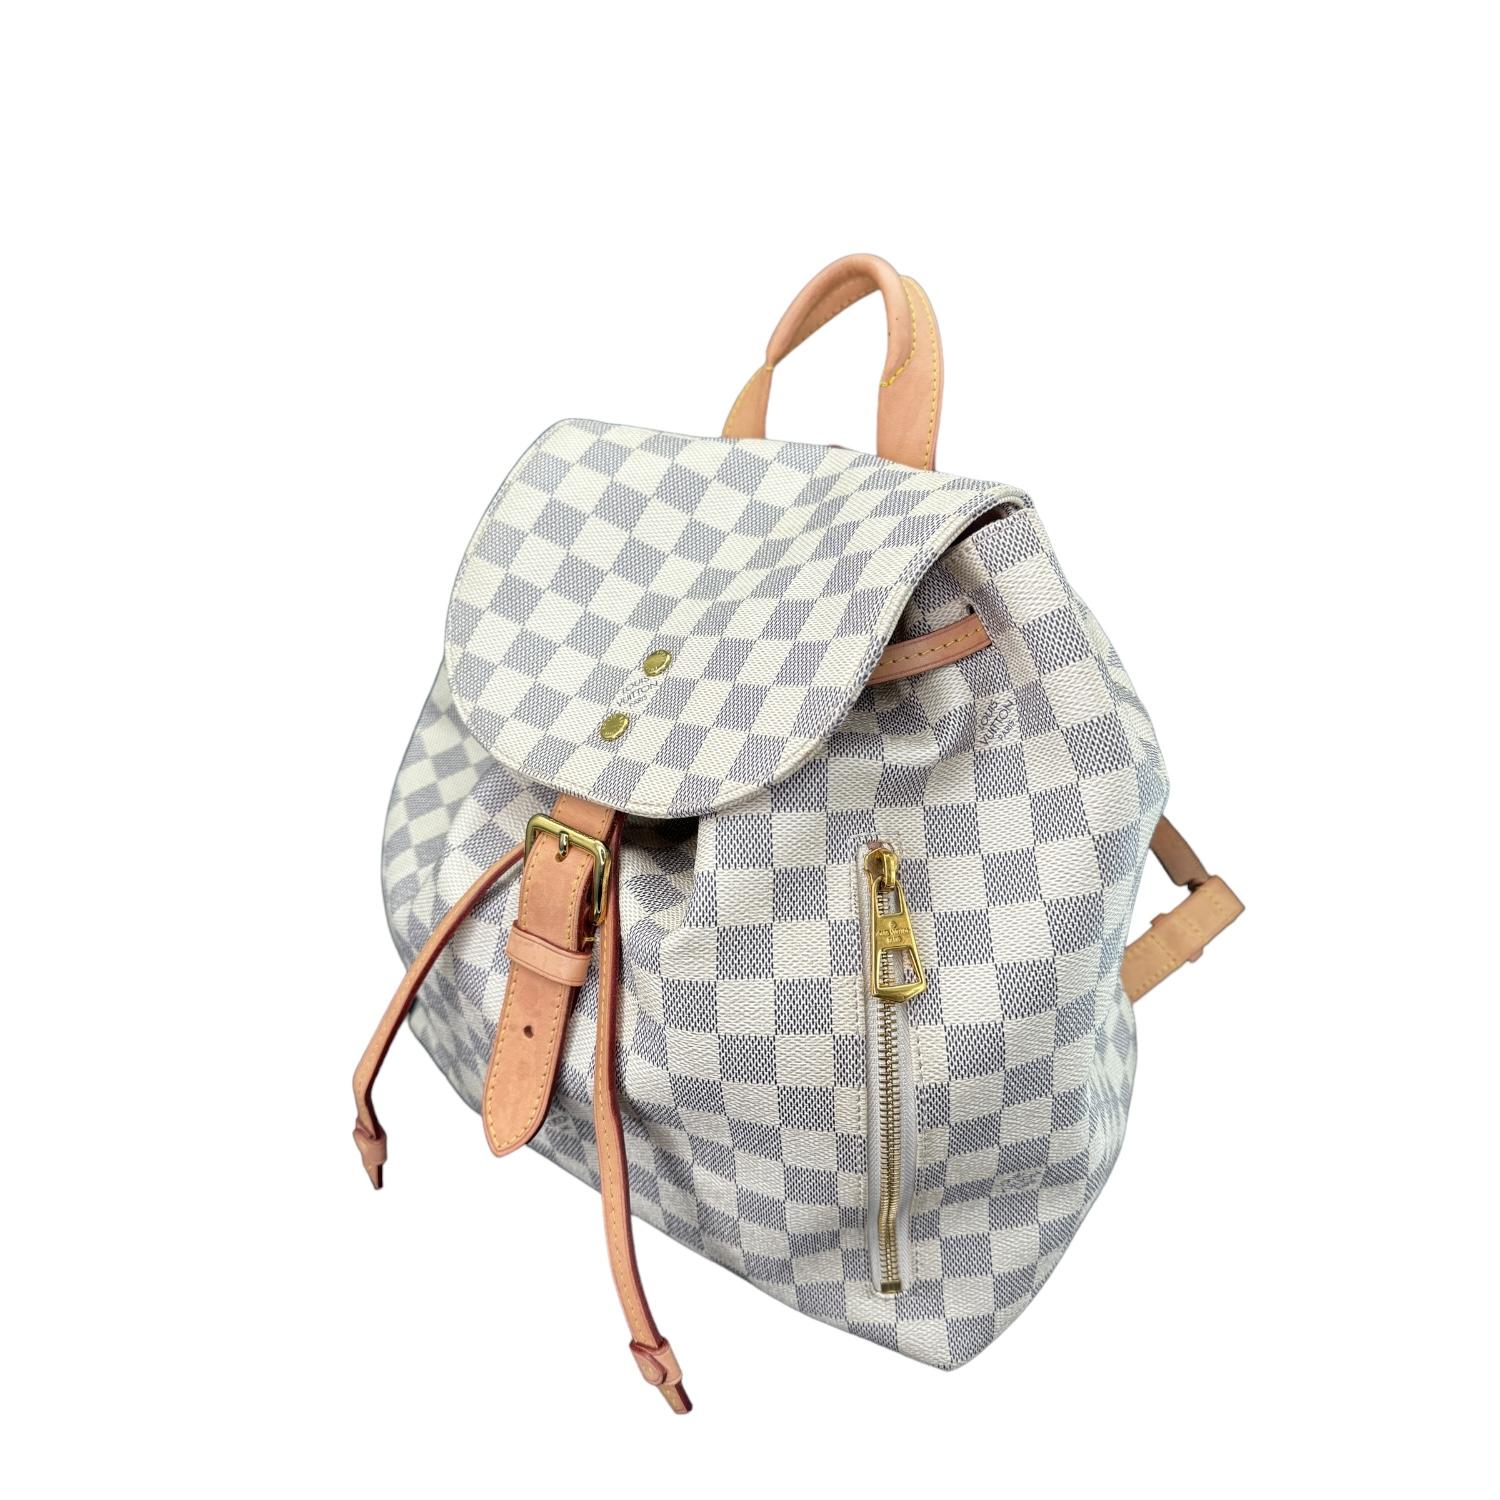 This Louis Vuitton backpack was made in France in 2020 and it is finely crafted in white Louis Vuitton Damier Azur coated canvas with leather trimming and gold-tone hardware features. It has dual adjustable leather shoulder straps along with a small